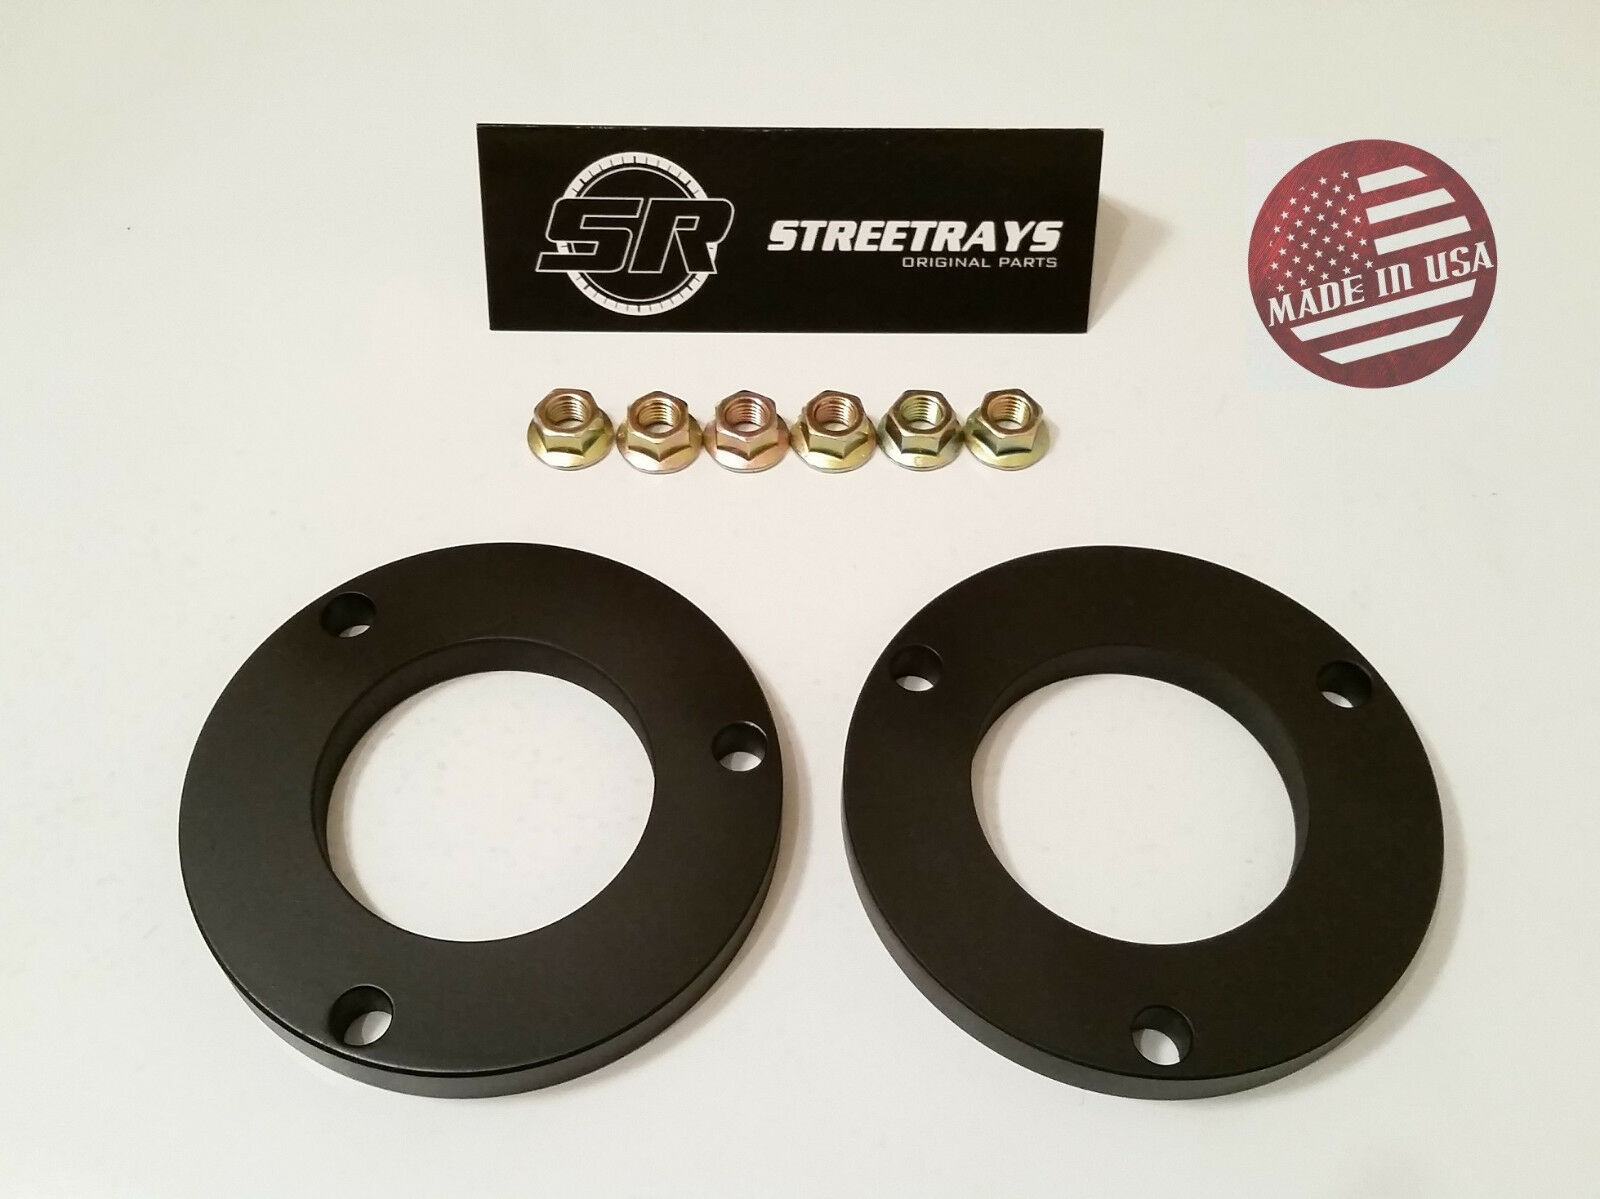 StreetRays.com: [SR] 1" Front Leveling Spacer Lift Kit FOR 95-04 Tacoma